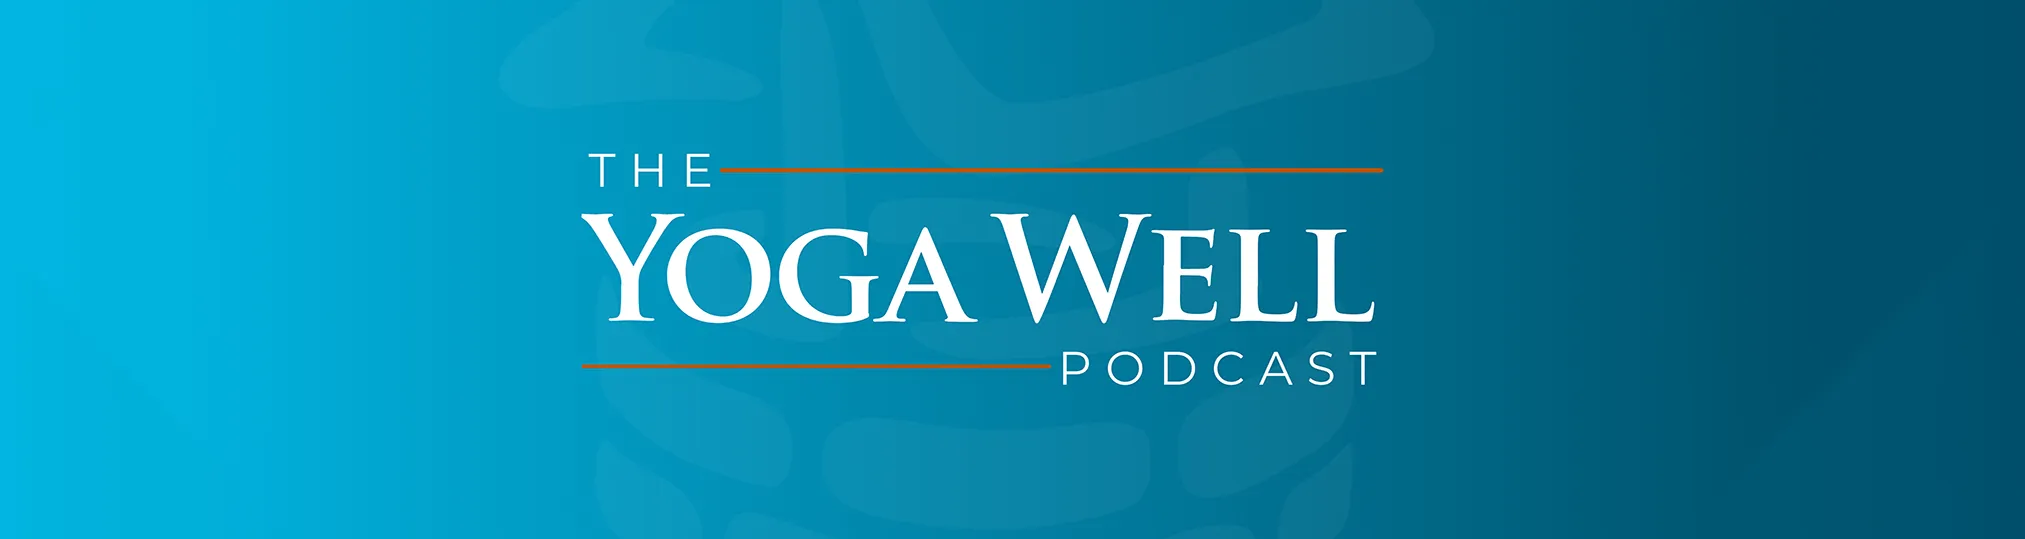 The Yoga Well Podcast Banner Listen Now